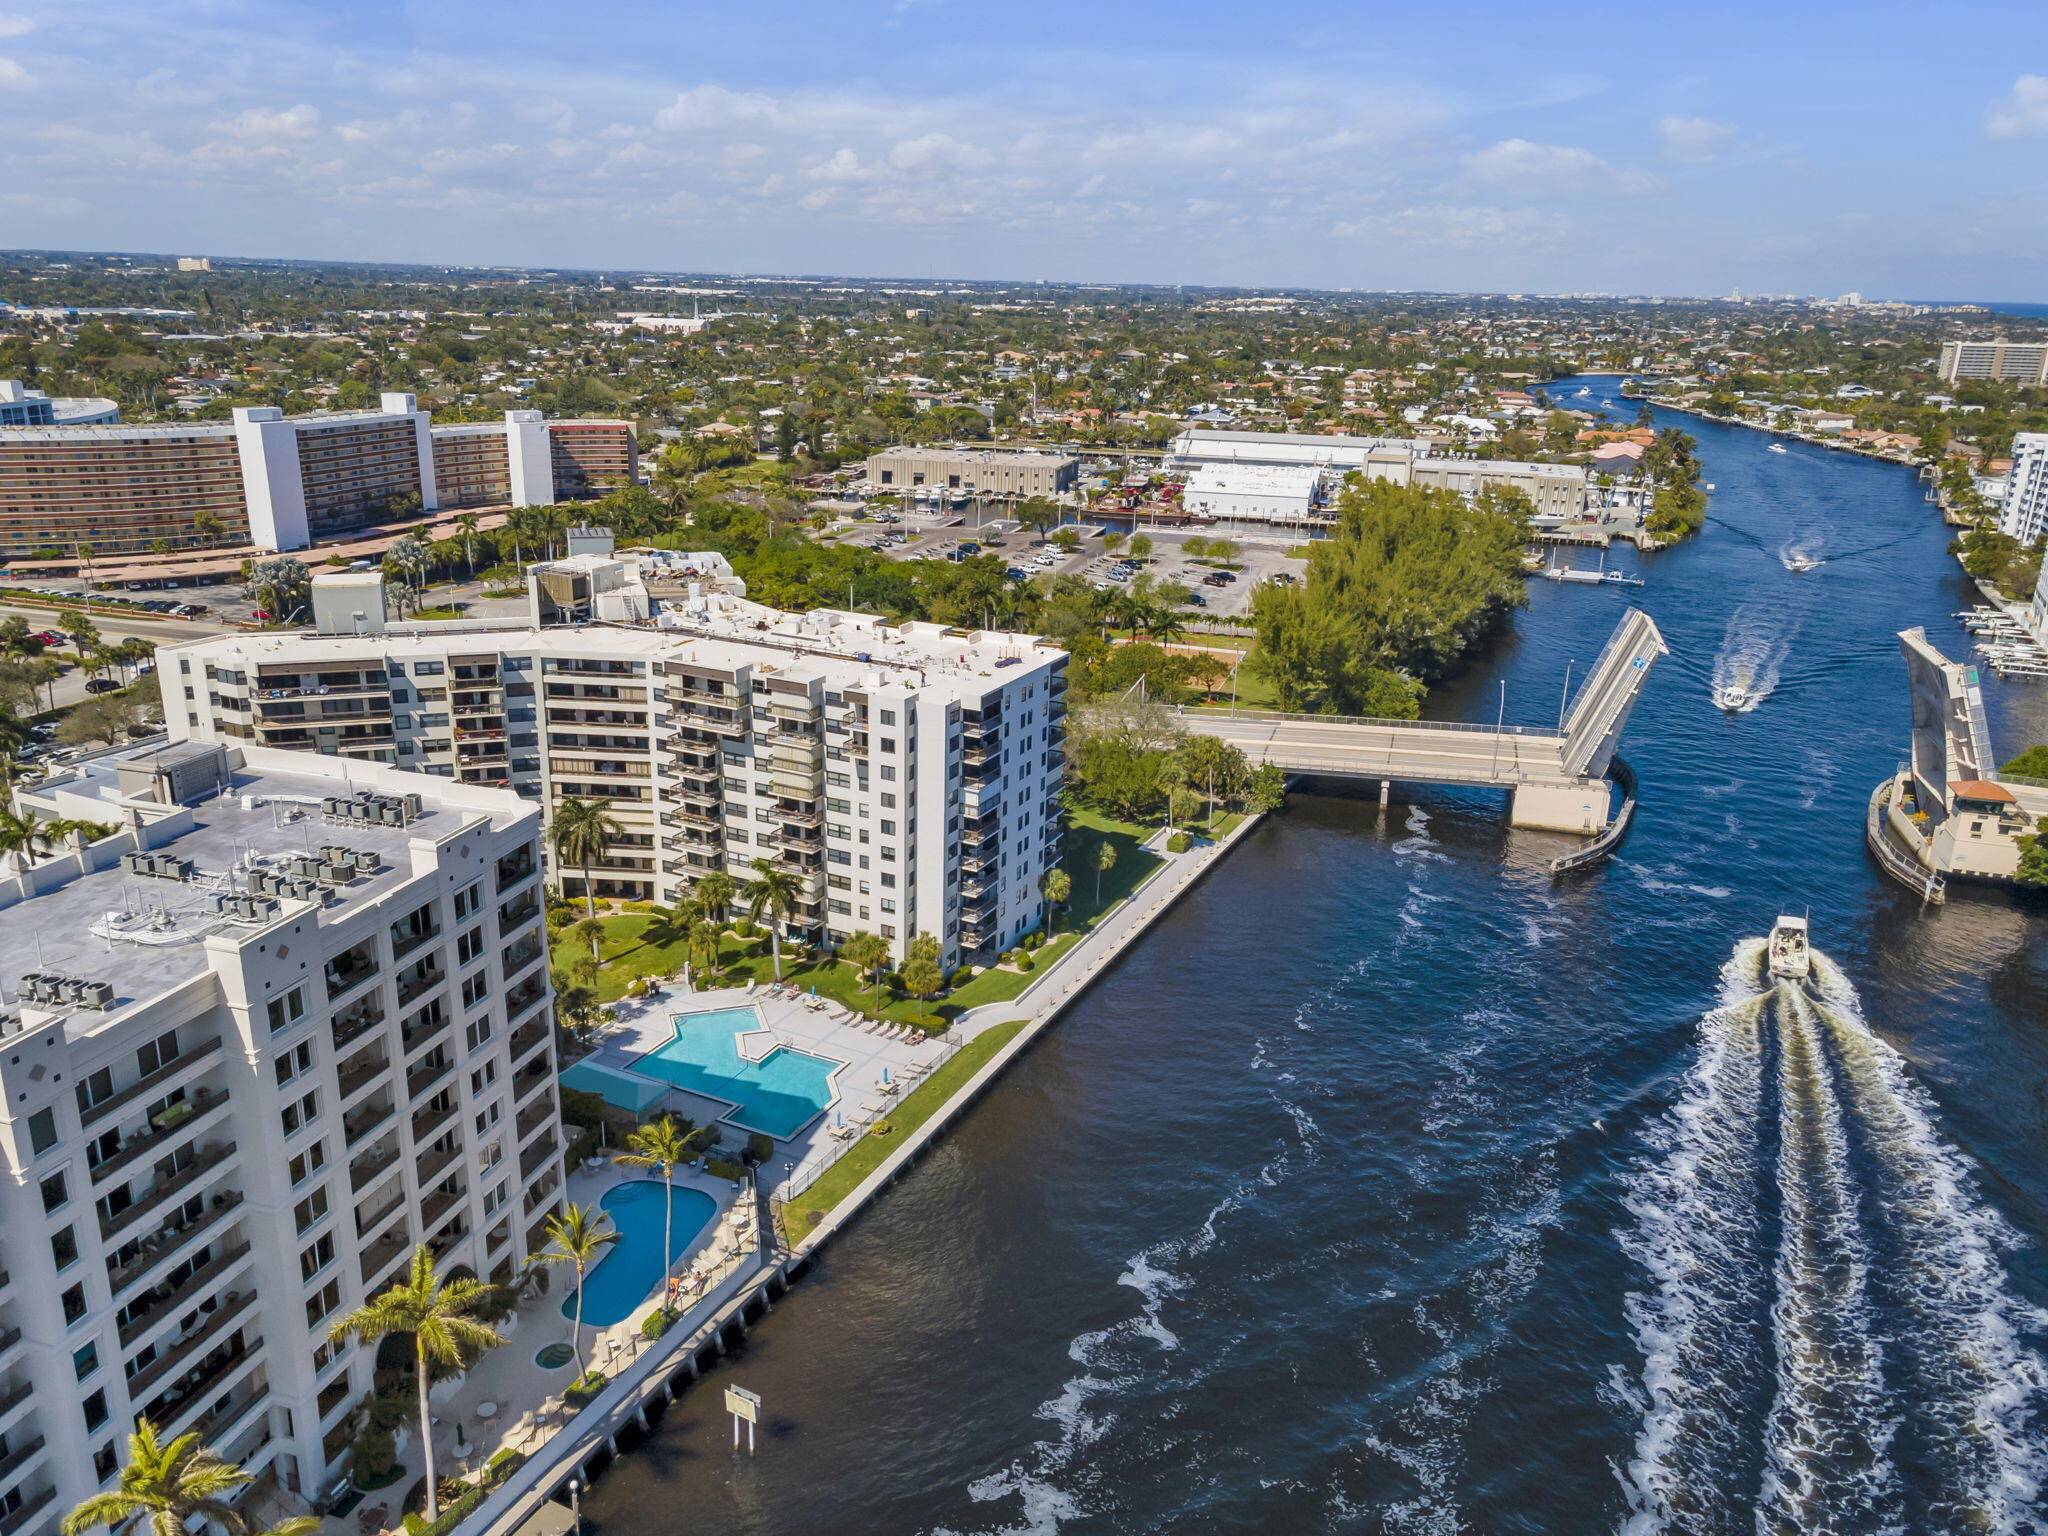 LIVE THE FLORIDA PARADISE LIFESTYLE IN YOUR UPGRADED 2 2 CONDO on the INTRACOASTAL WATERWAY just a short distance to THE BEACH, RESTAURANTS, SHOPPING, AND THE POMPANO BEACH PIER !